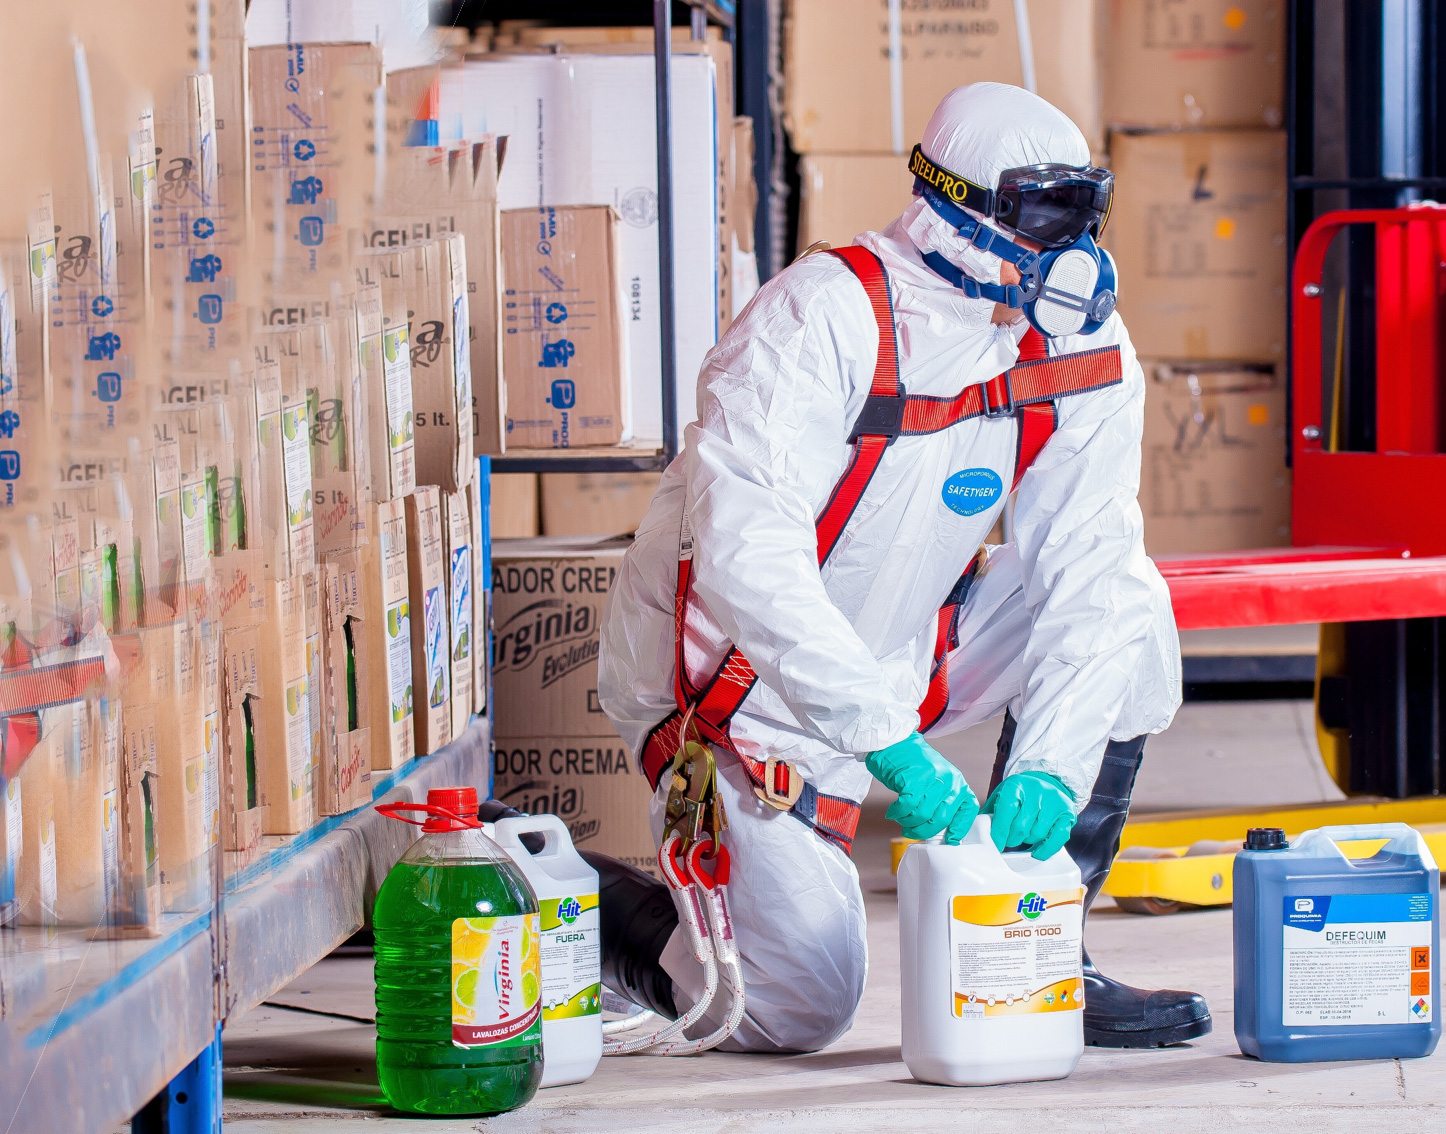 Clean management worker wearing full protective suit opening a white jug of unknown substance